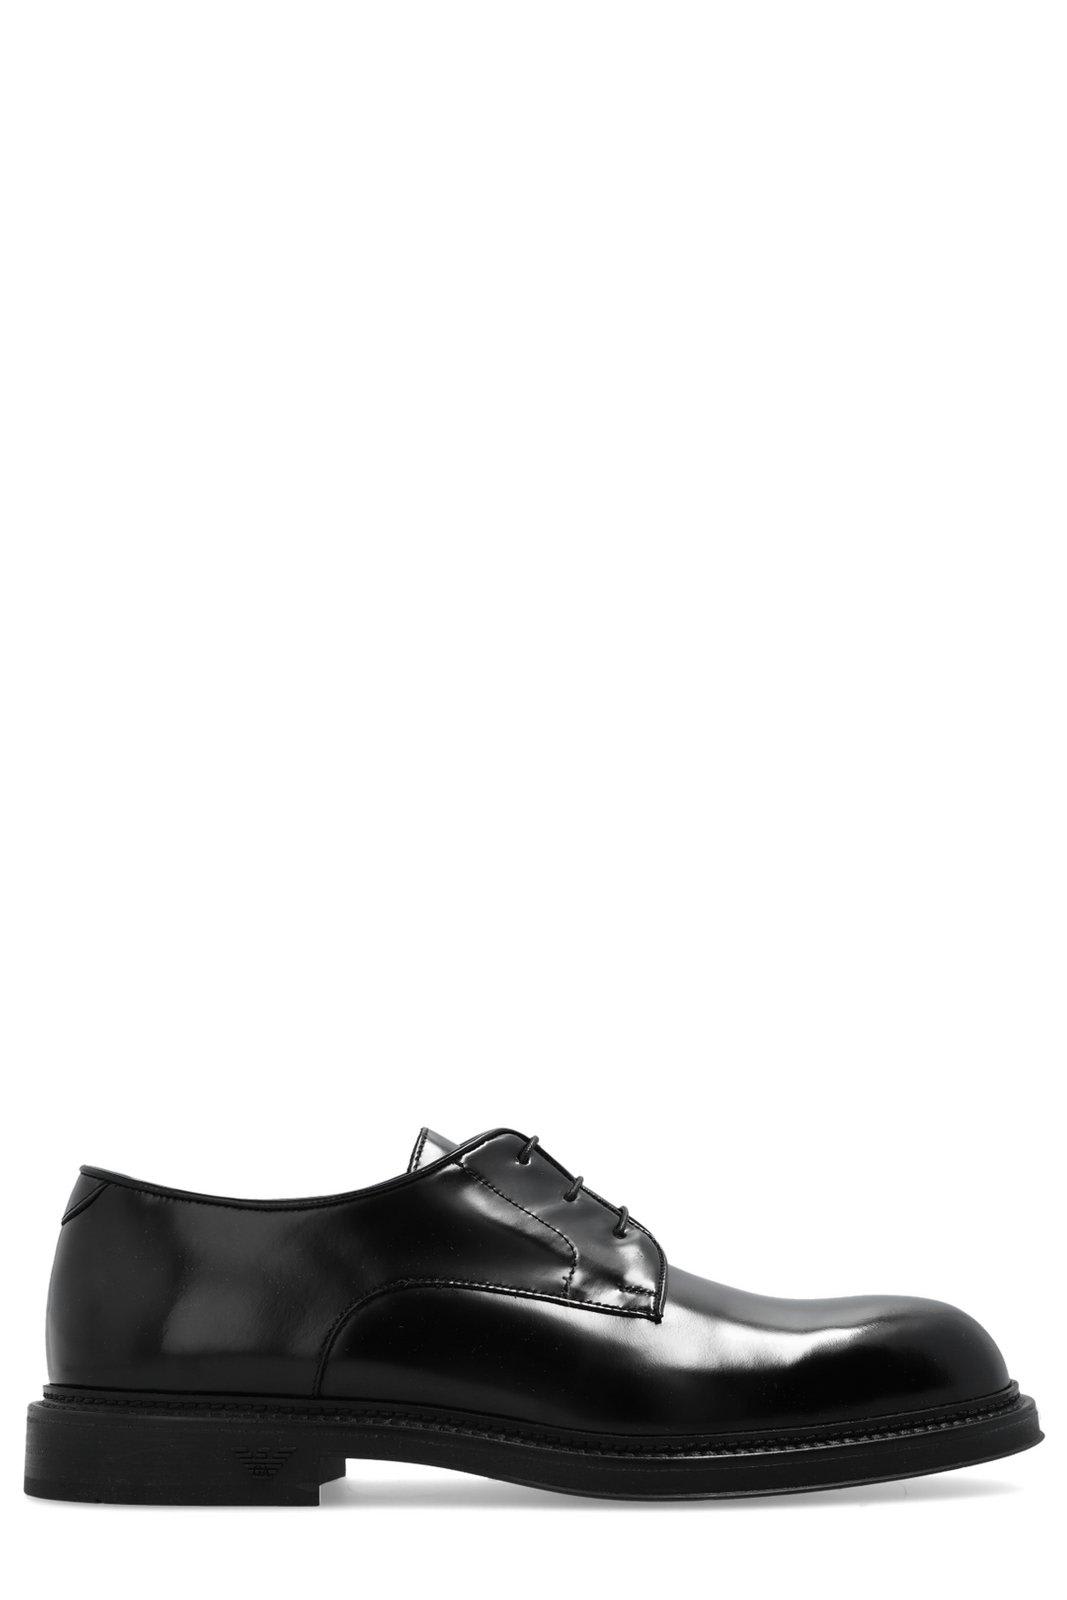 EMPORIO ARMANI LEATHER DERBY SHOES